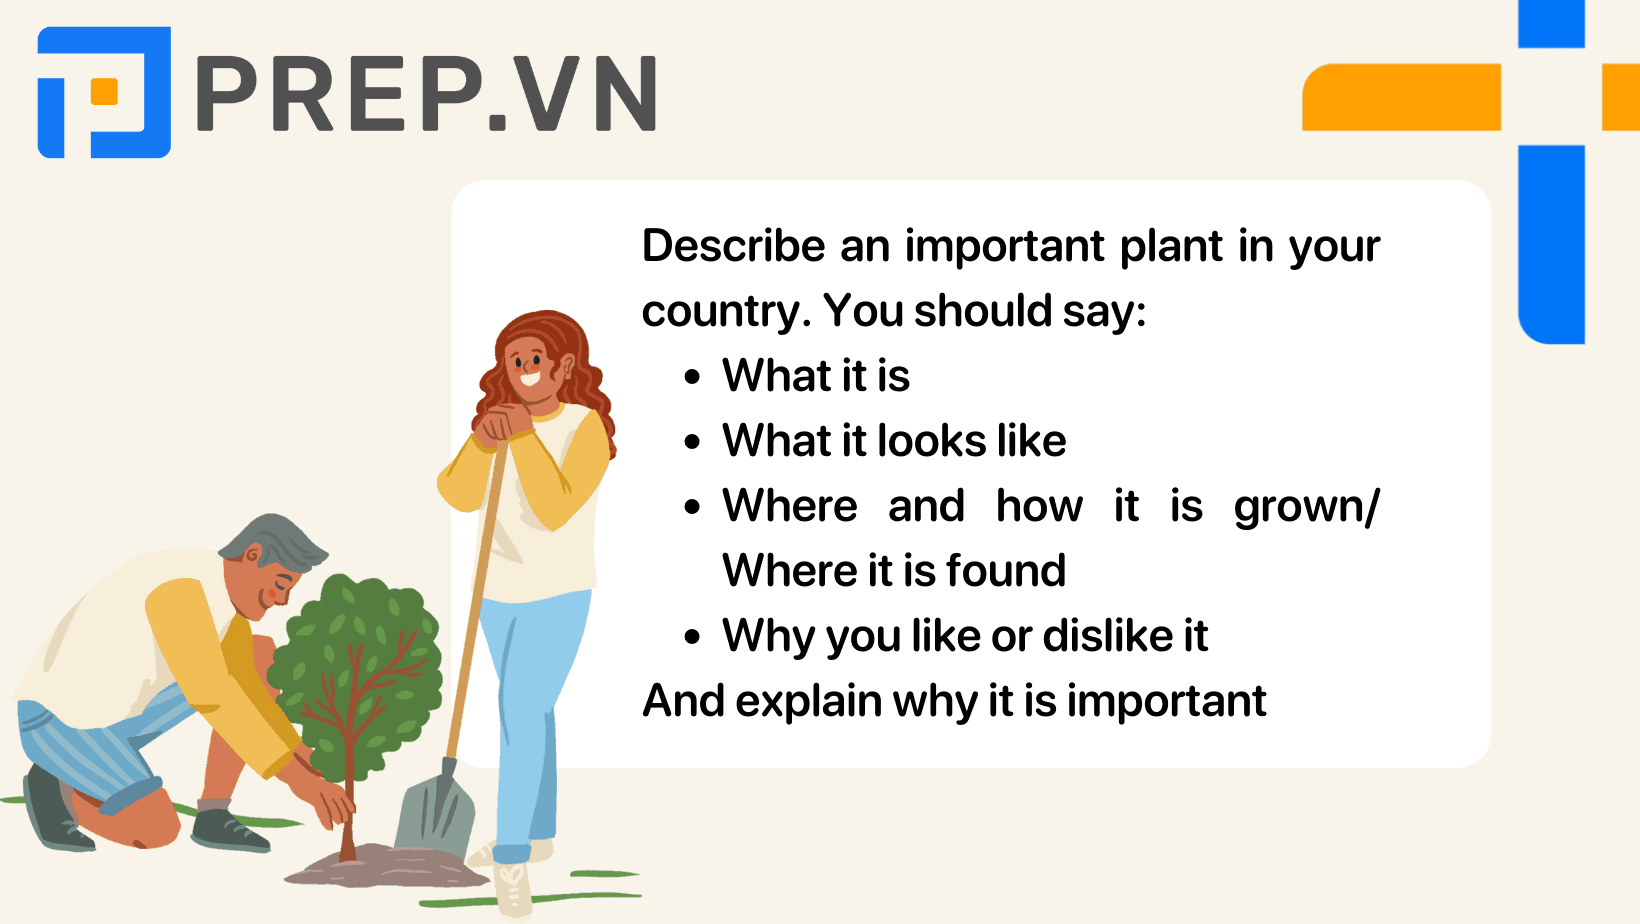 Describe an important plant in your country